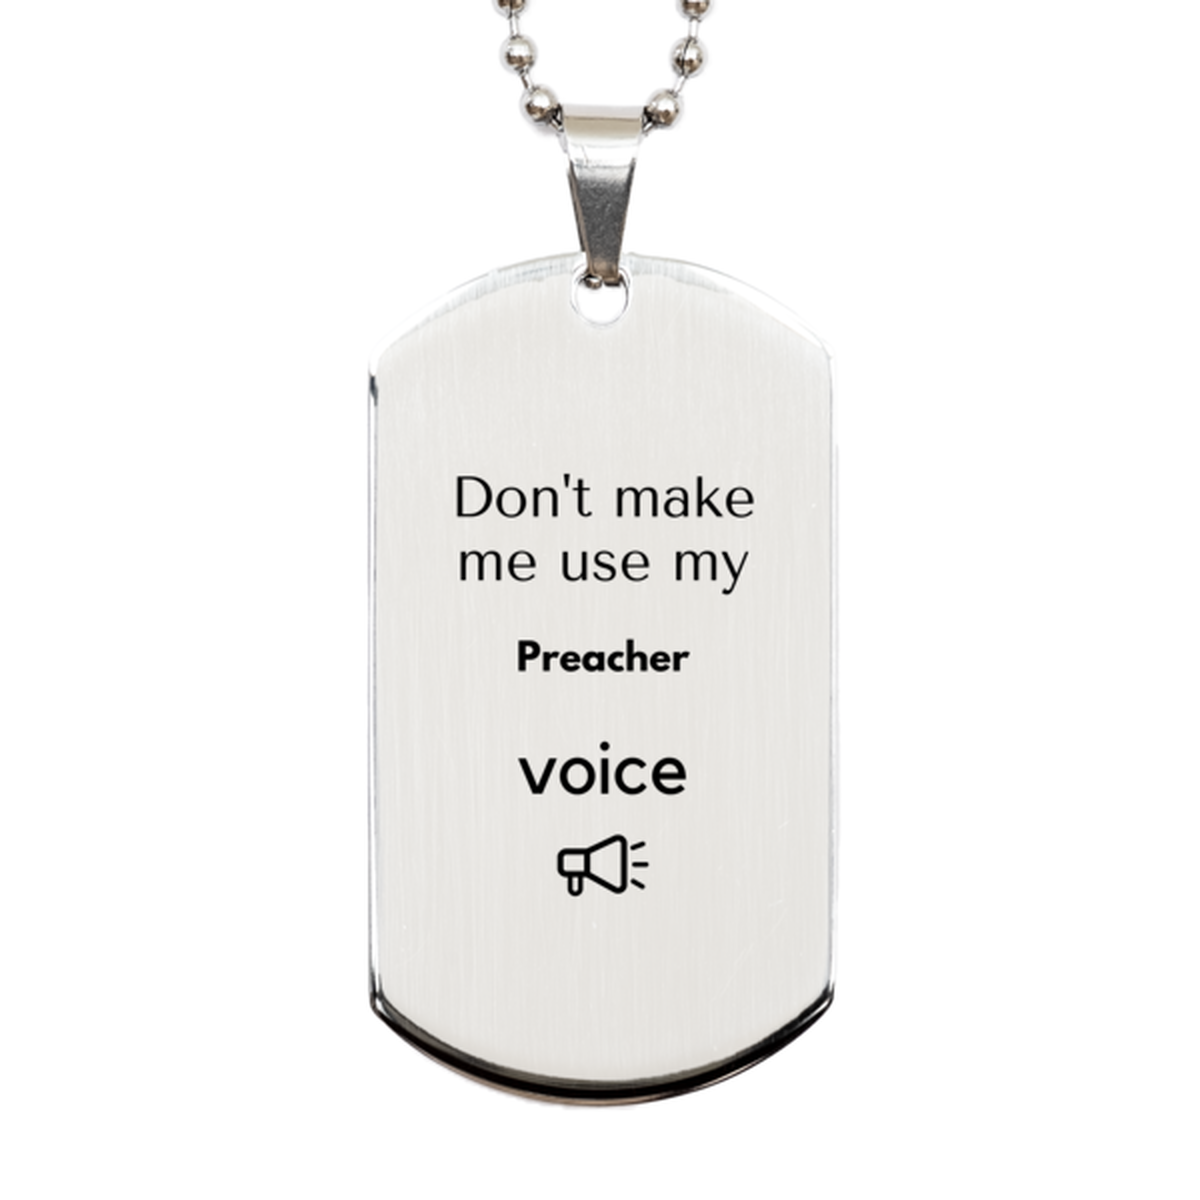 Don't make me use my Preacher voice, Sarcasm Preacher Gifts, Christmas Preacher Silver Dog Tag Birthday Unique Gifts For Preacher Coworkers, Men, Women, Colleague, Friends